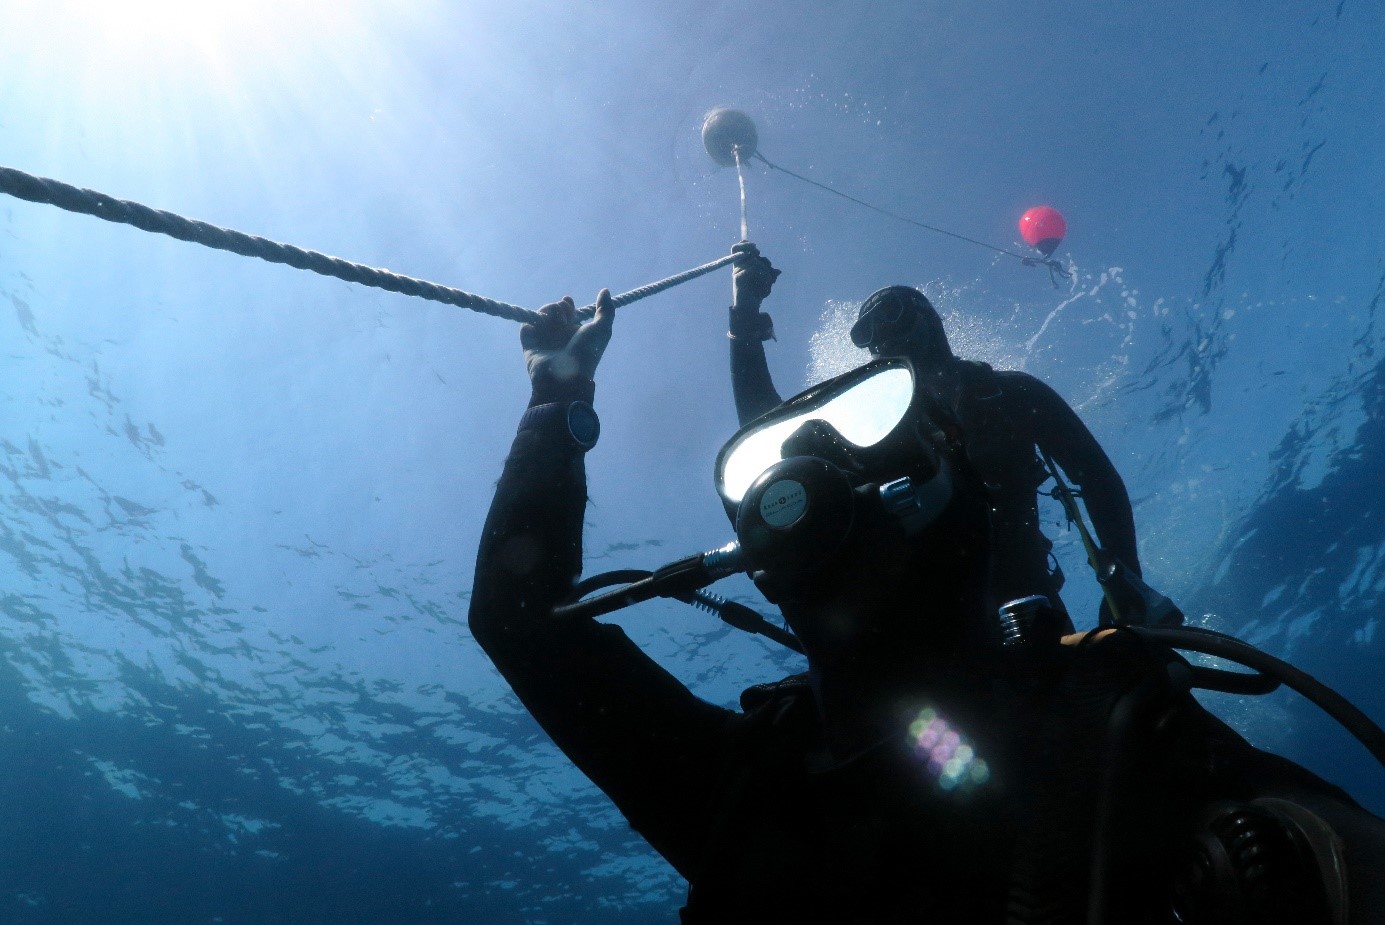 A scuba diver holding a line during their ascent, a point at which they may notice a diving nose bleed from sinus barotrauma